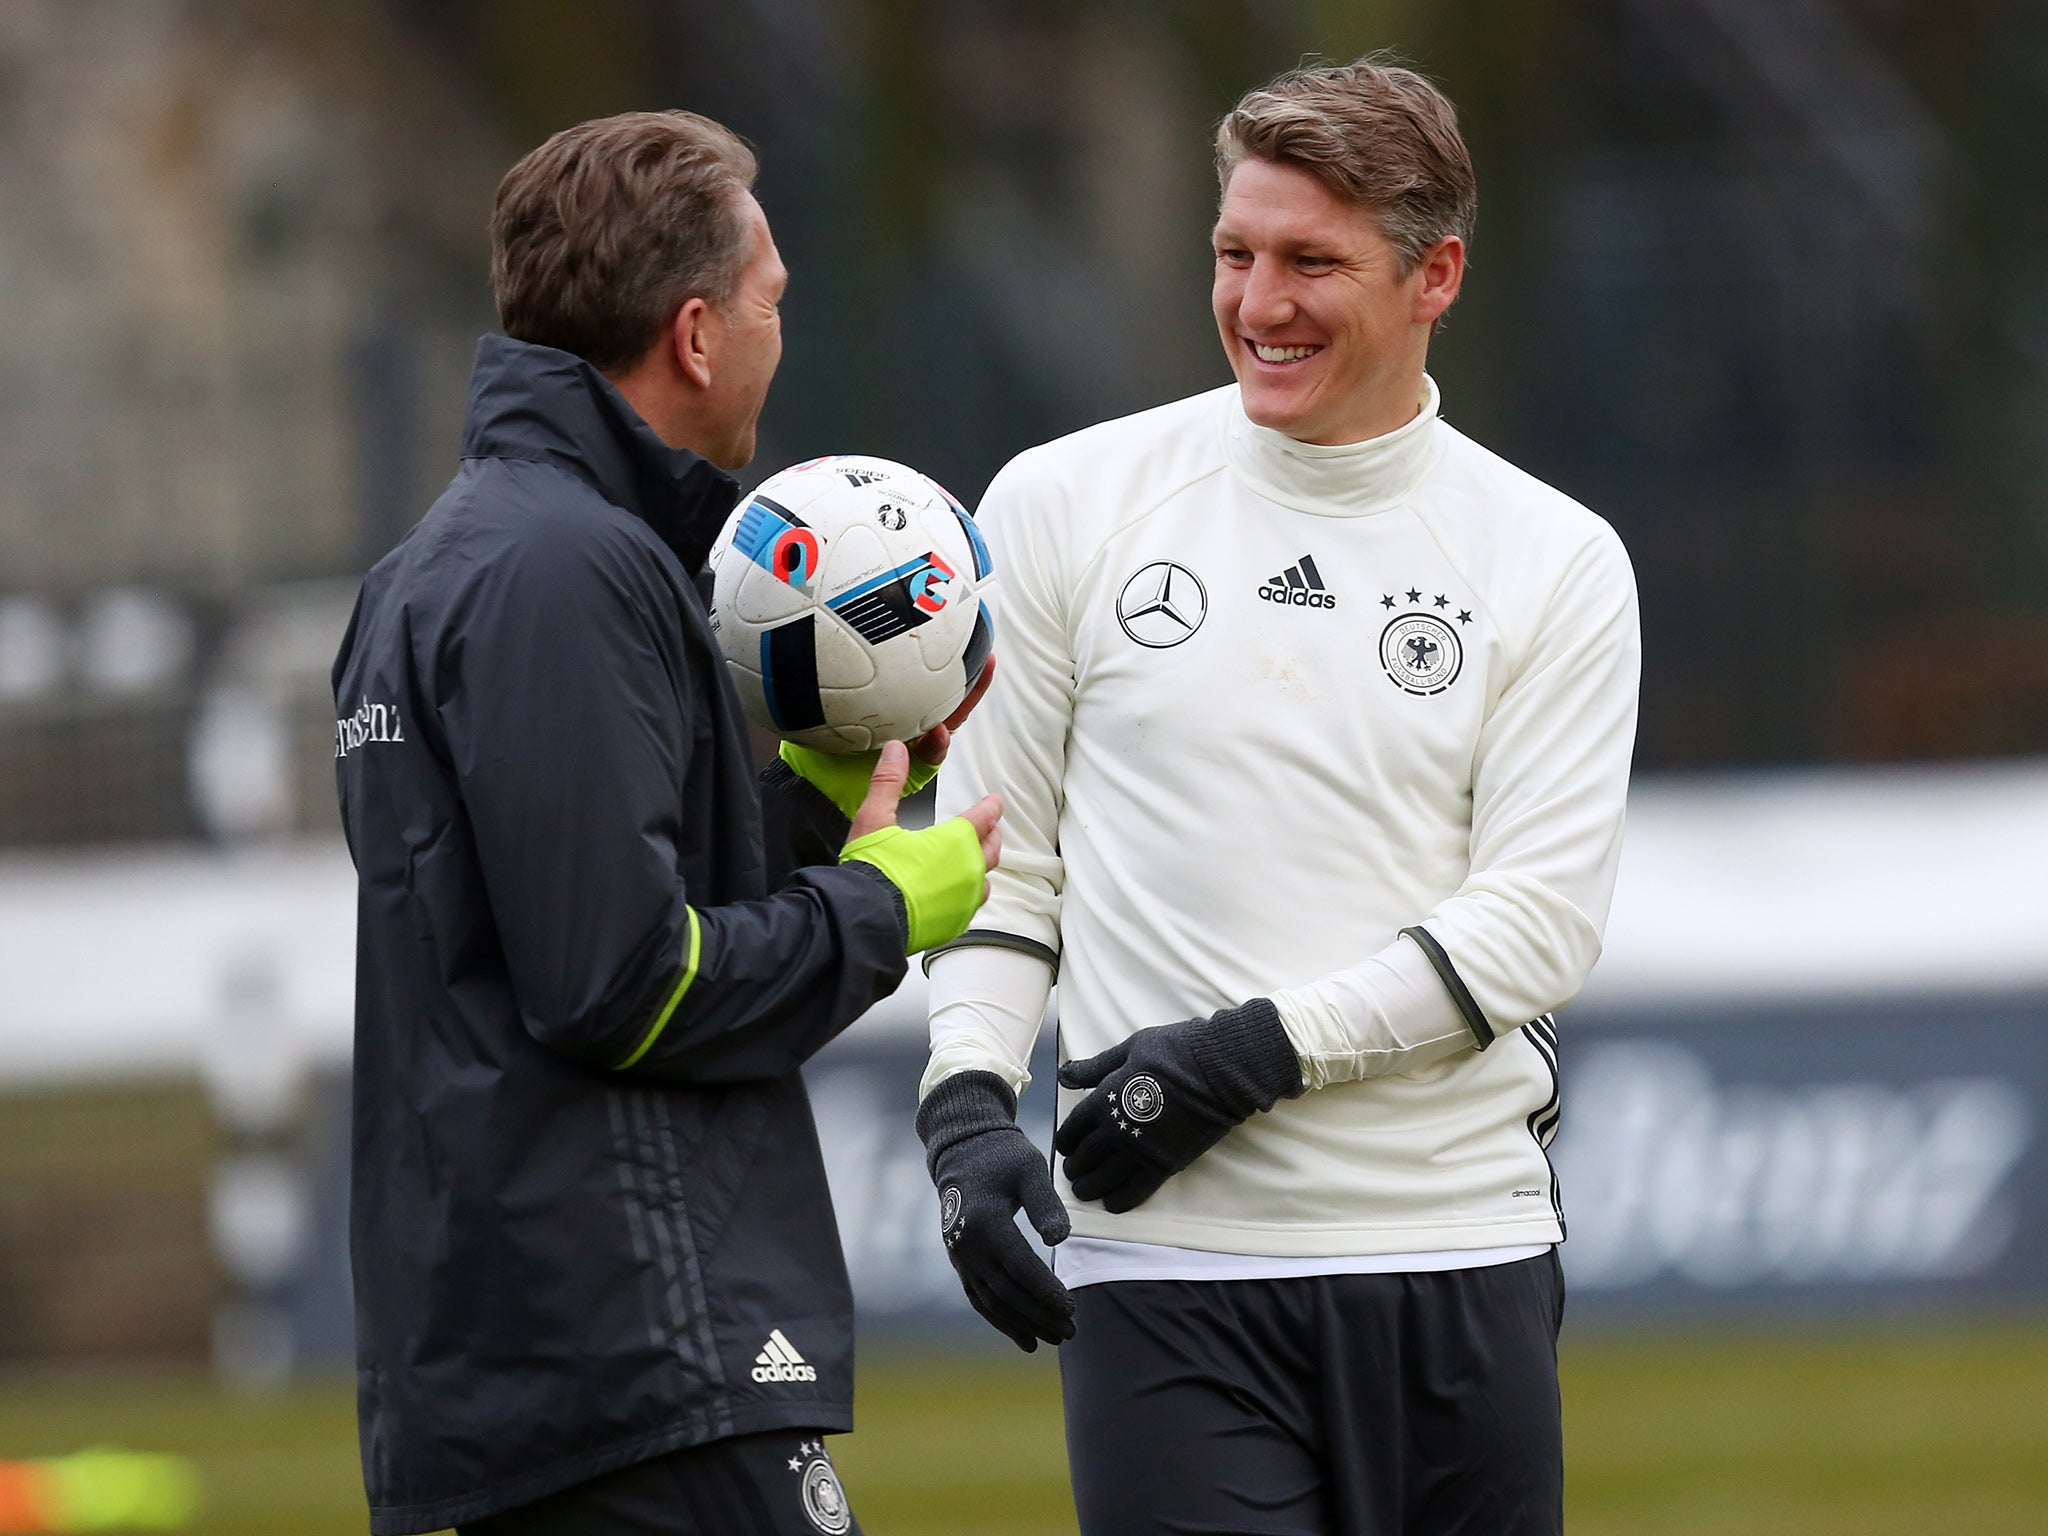 Bastian Schweinsteiger in training with the Germany national team